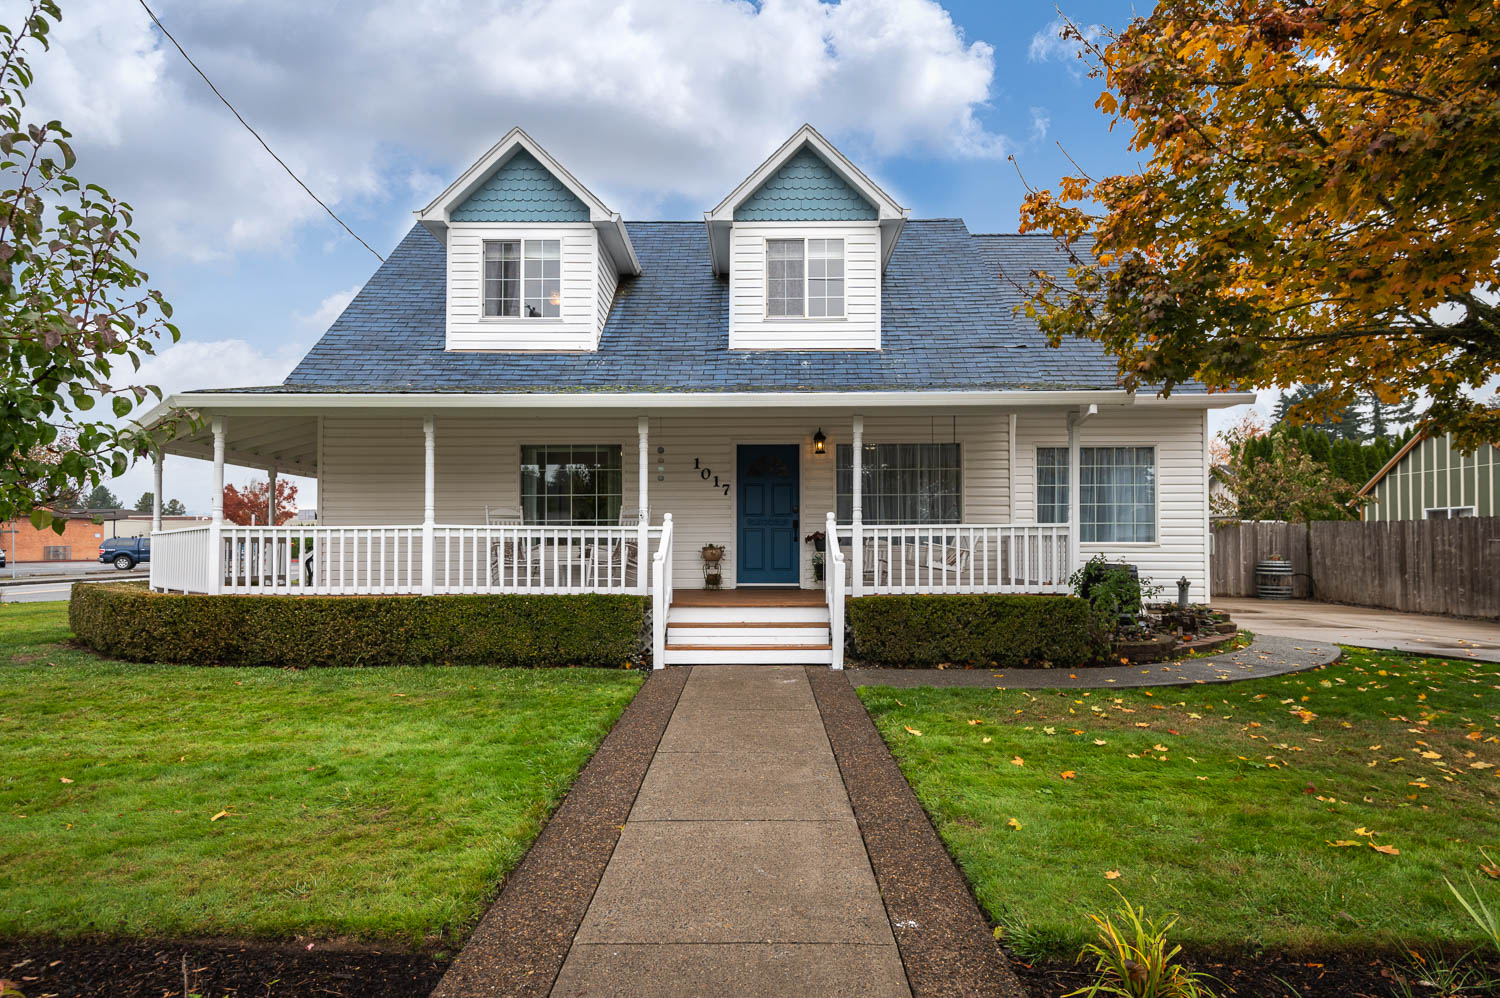 SOLD in 2 days – McMinnville Farmhouse